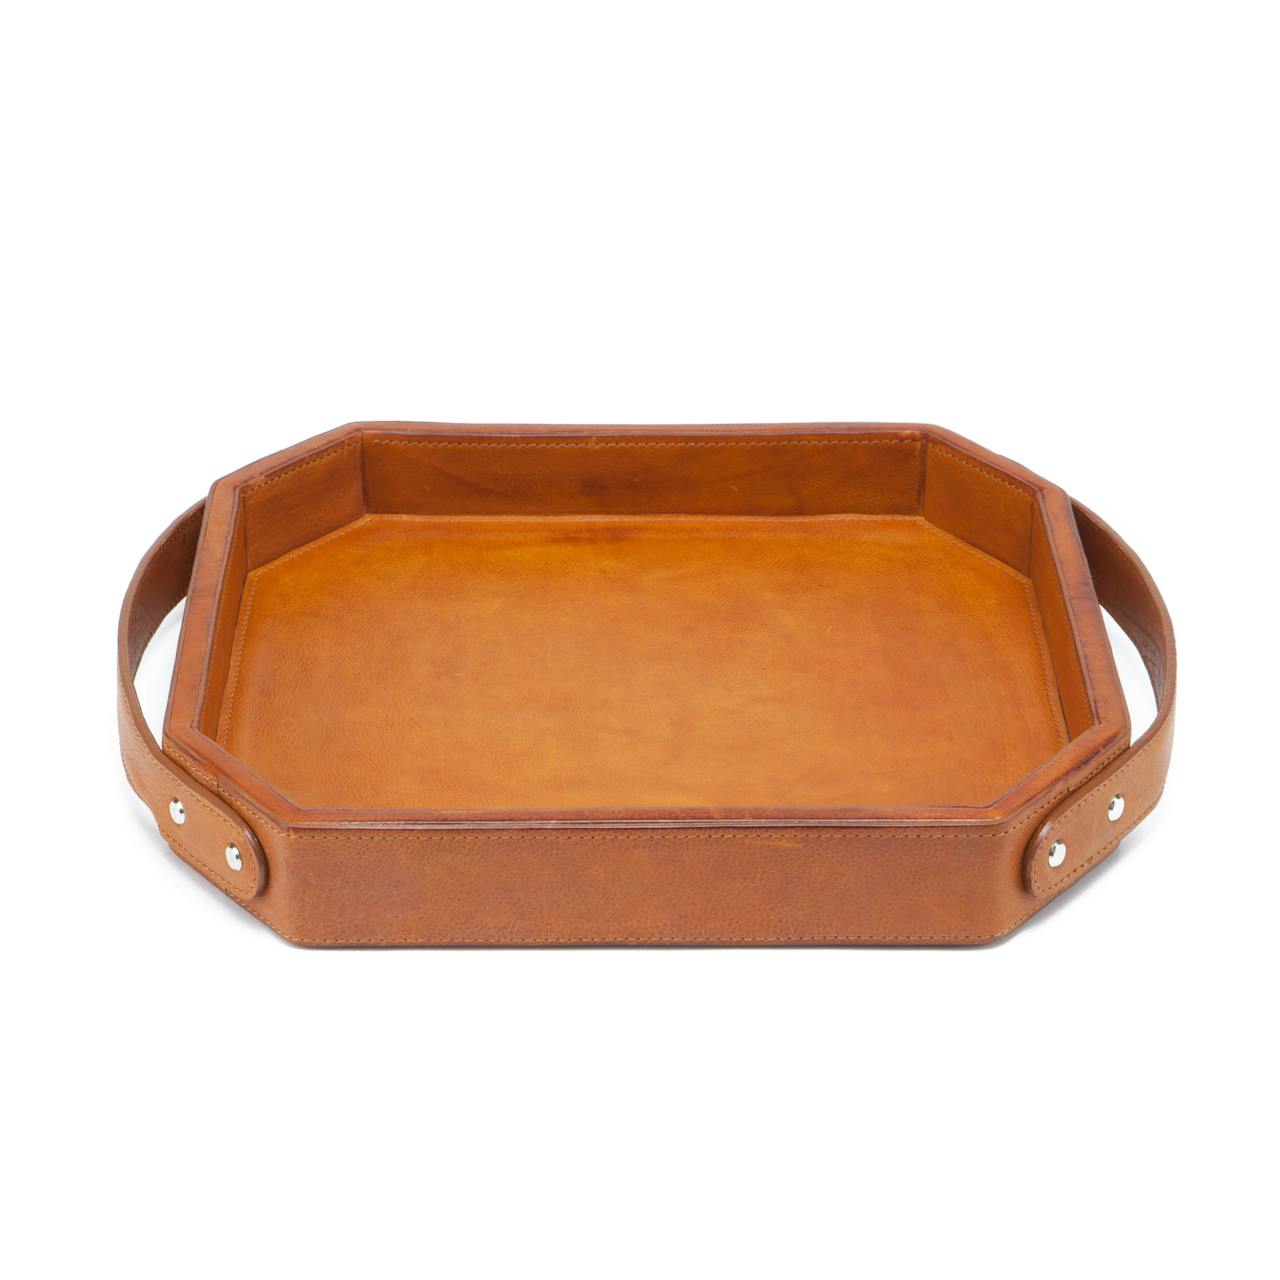 Moore & Giles Leather Room Tray - Small